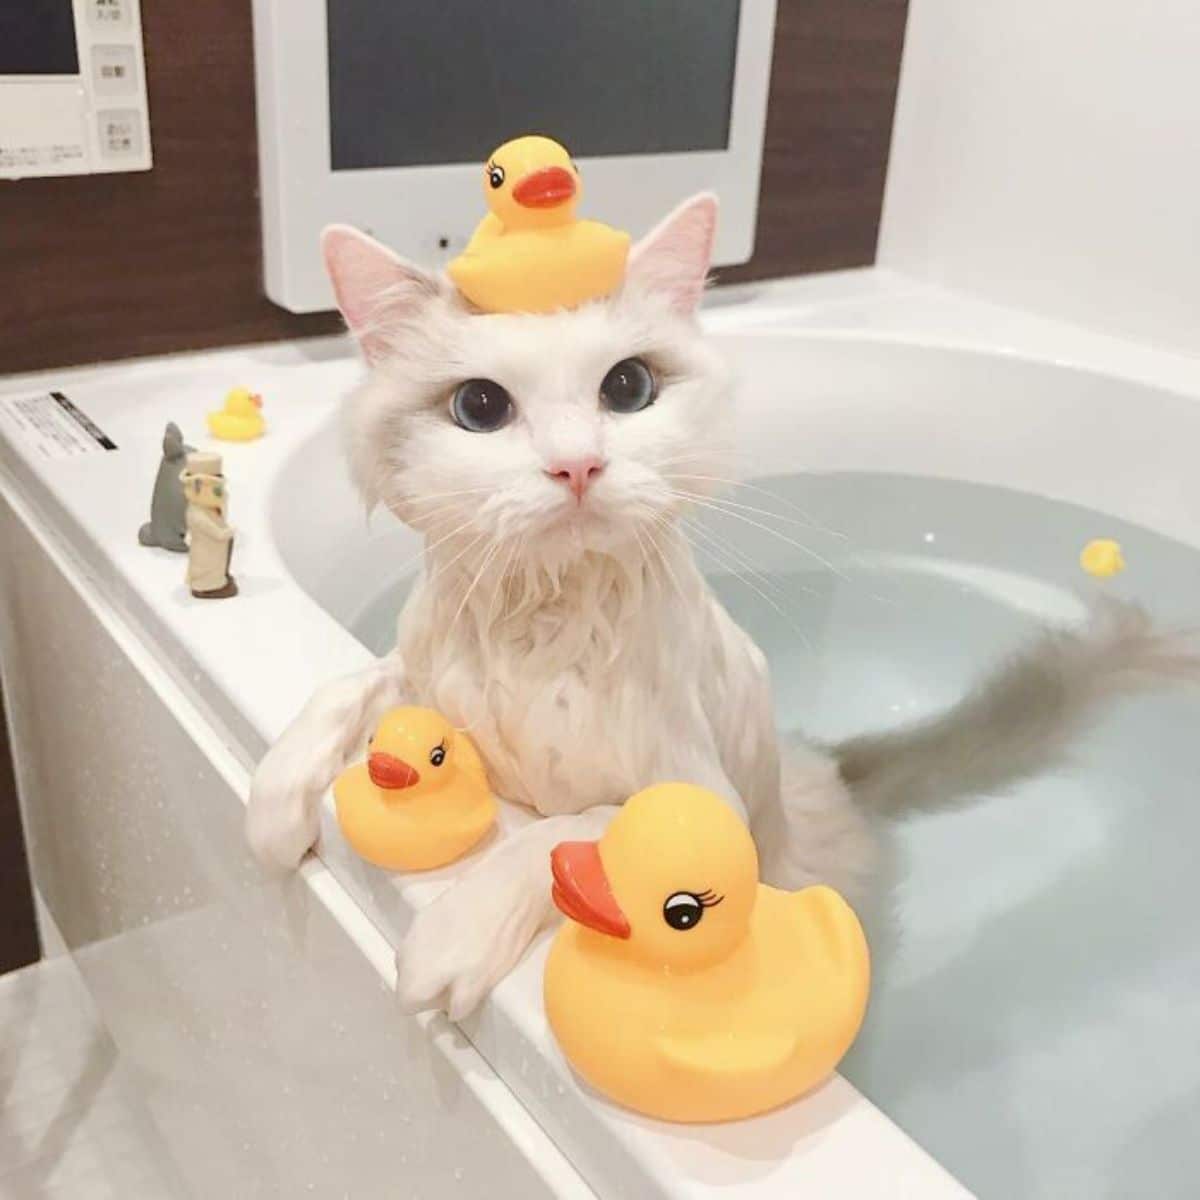 wet white cat in a water-filled bathtub with two rubber ducks on the rim of the tub and another one on its head and some other figurines on the rim